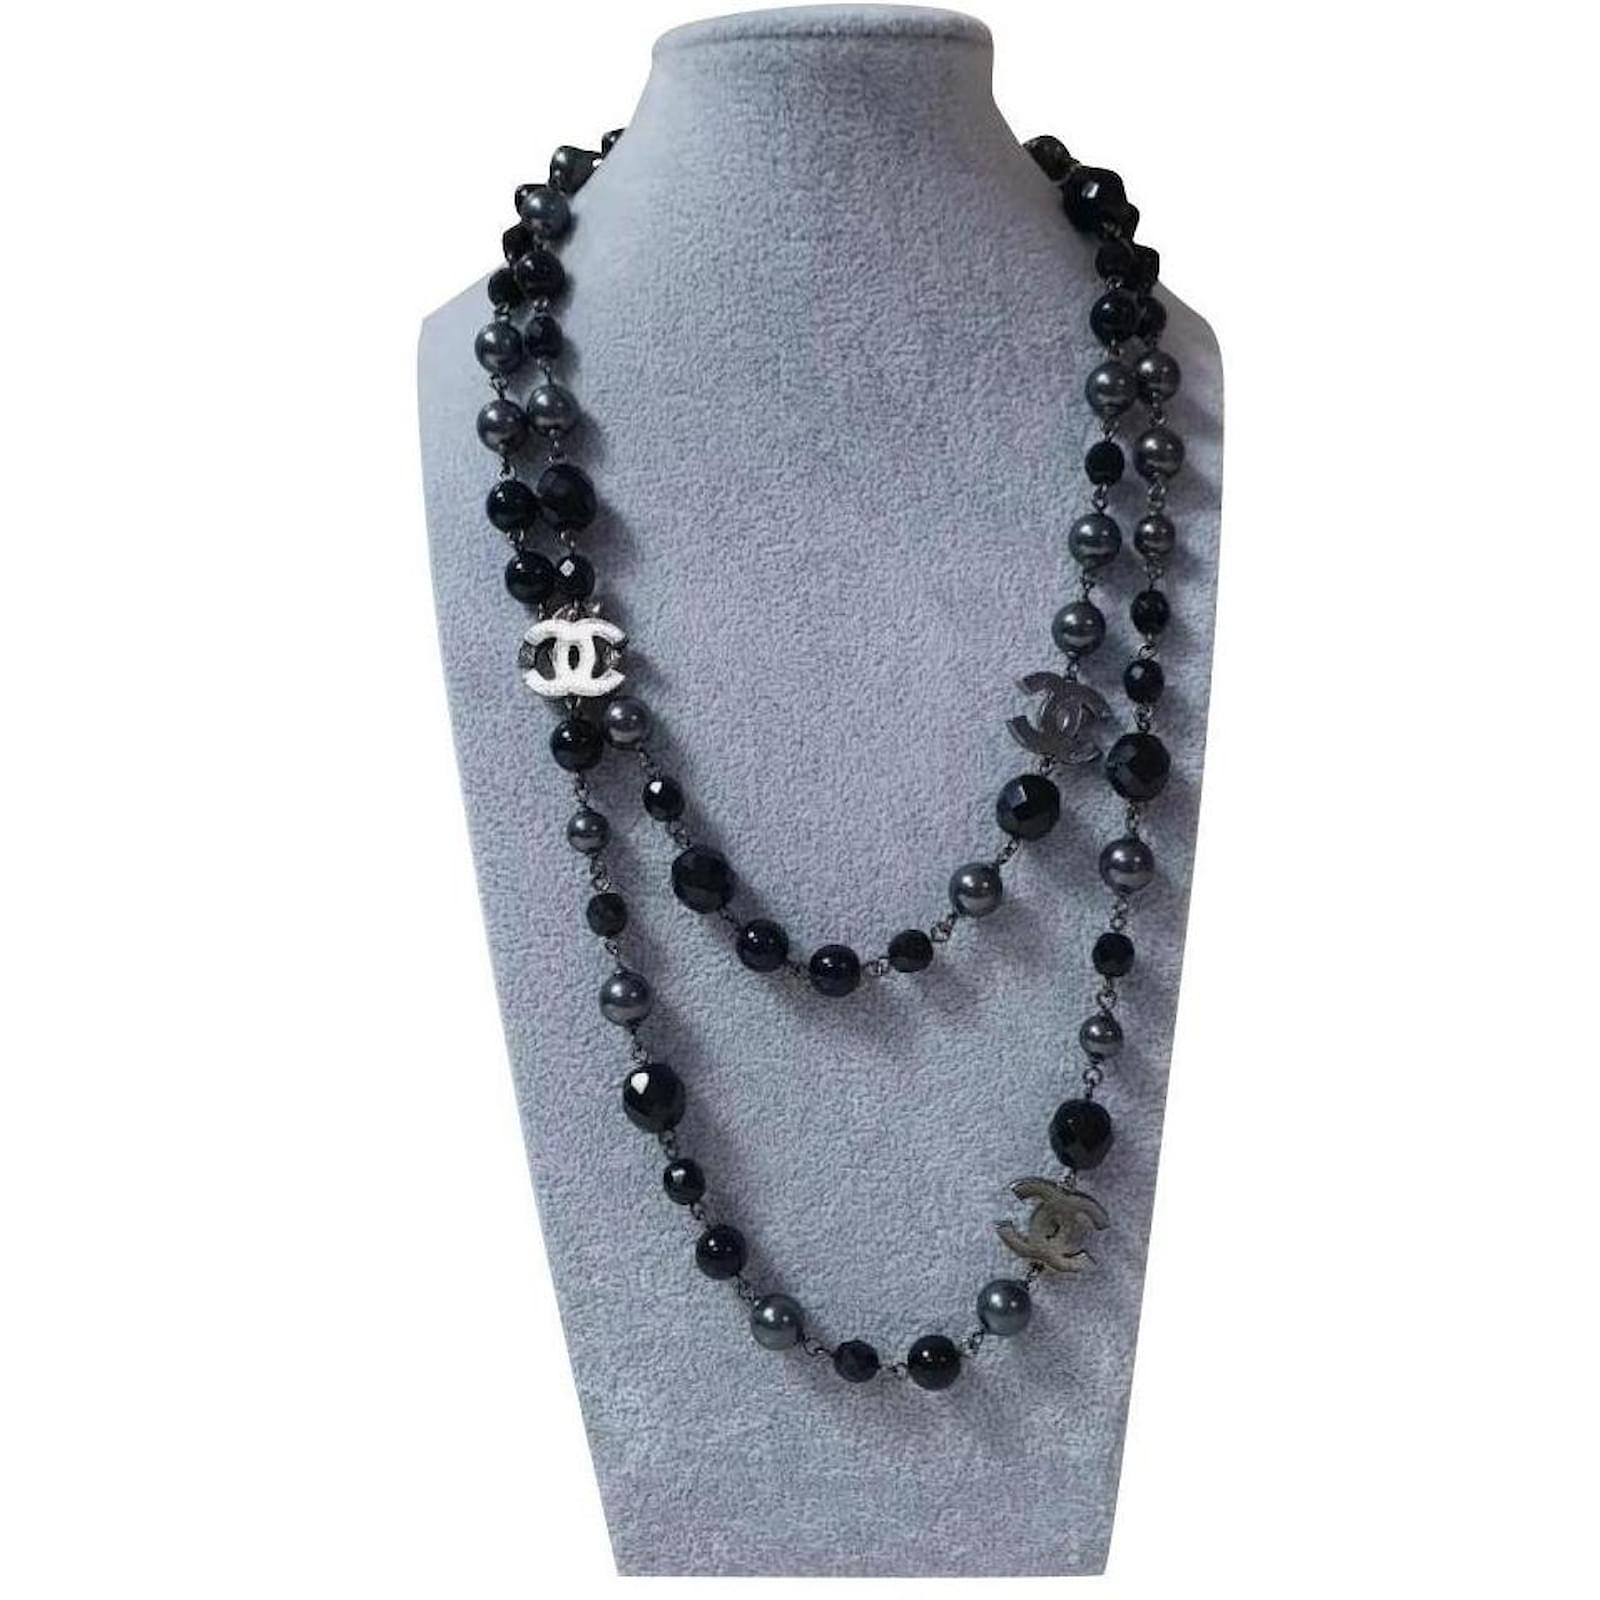 CHANEL Pearl Beaded CC Long Necklace Black White 672309  FASHIONPHILE